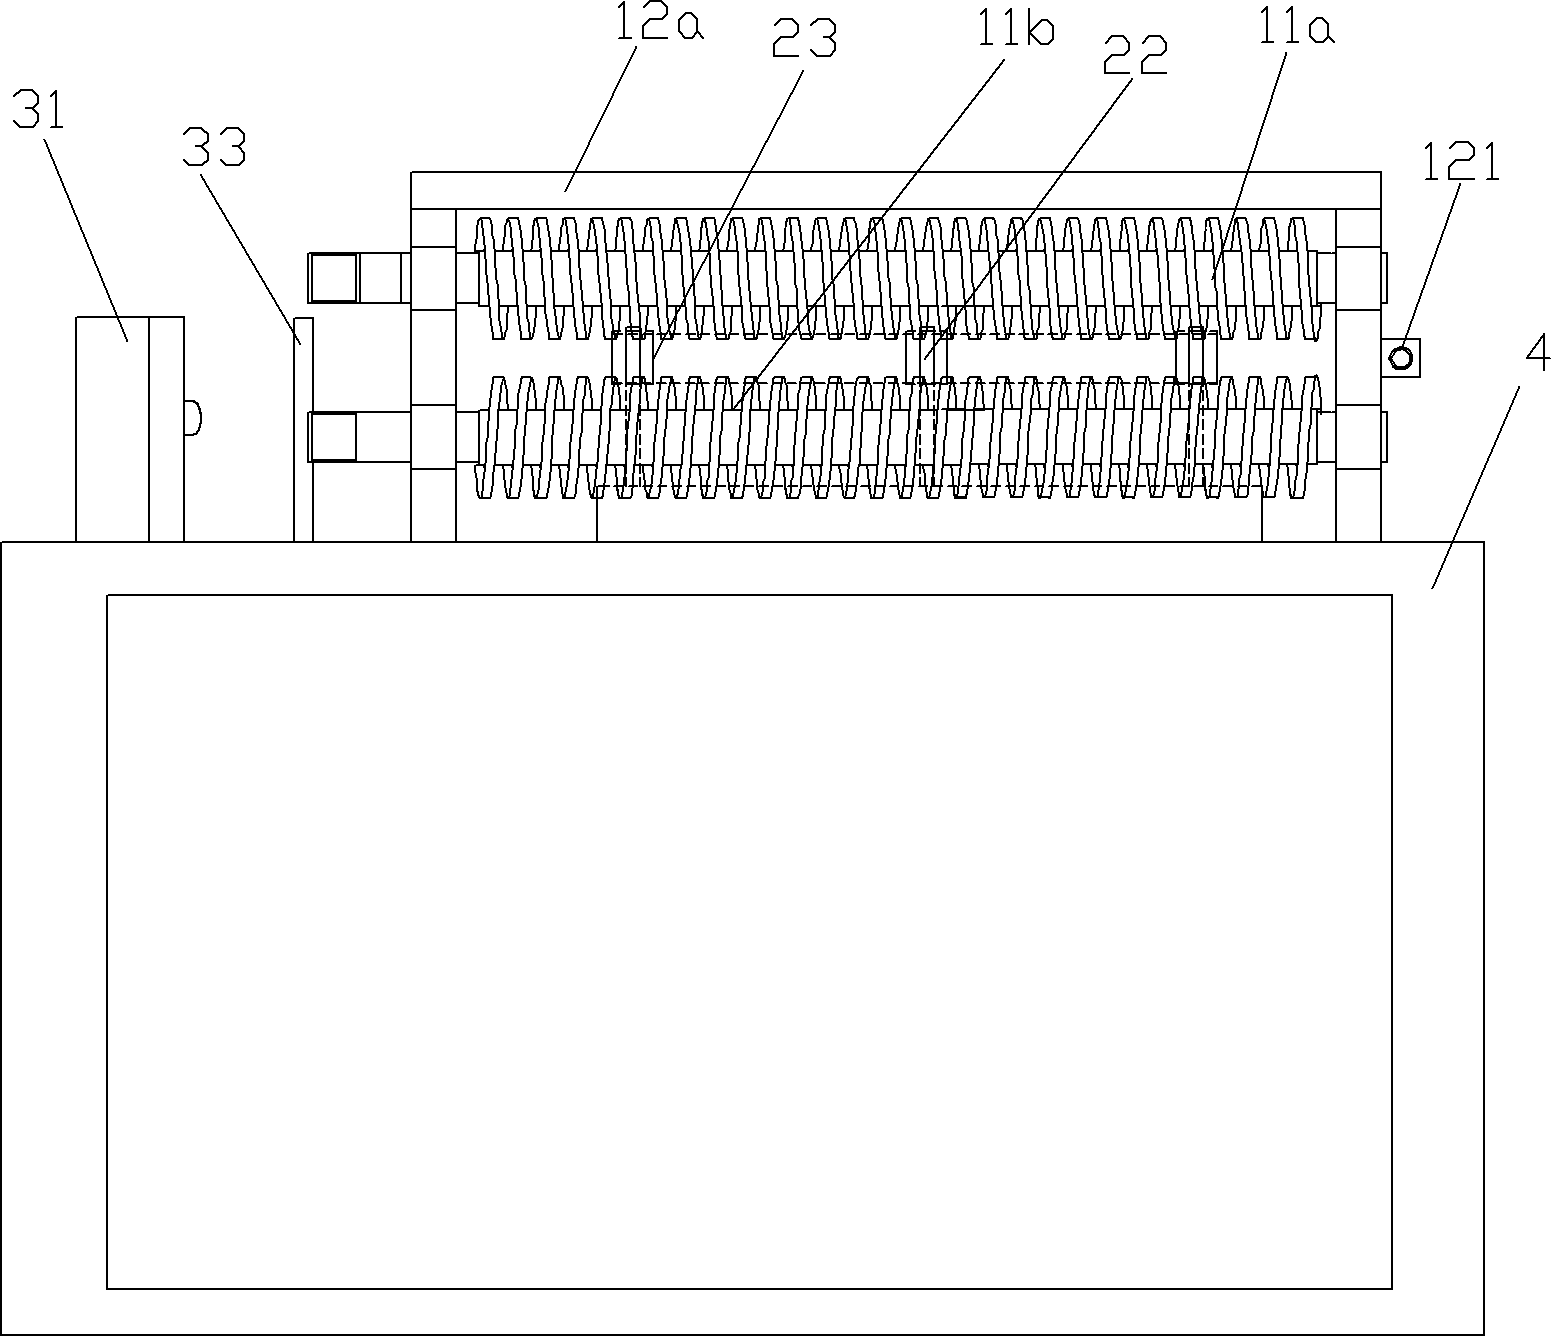 Automatic side-sticking equipment used during filter element production